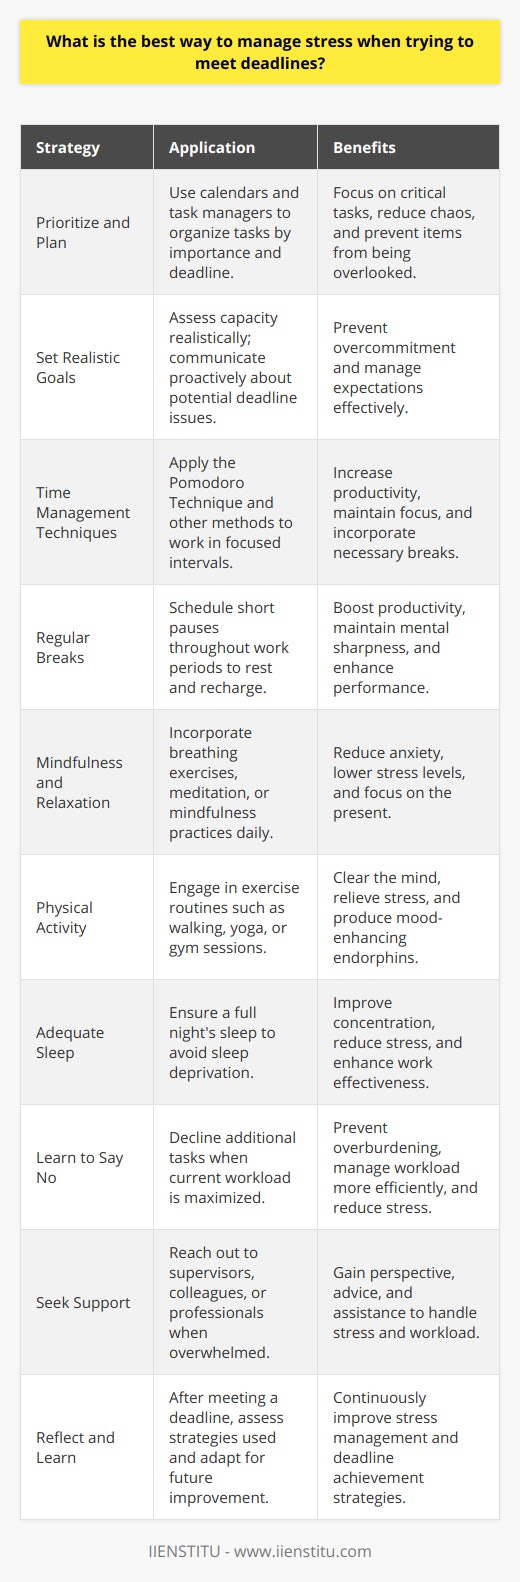 Meeting deadlines can often become a significant source of stress, but with the right approach, you can navigate these high-pressure situations more calmly and efficiently. Here are several strategies to effectively manage stress while striving to meet your goals on time:1. Prioritize and Plan: Creating a priority list helps you focus on what's most important, reducing the chaos of tackling too many things at once. Break down tasks into smaller, more manageable steps and set a timeline for each. Use tools like calendars, task managers, or apps to keep track, ensuring that nothing slips through the cracks.2. Set Realistic Goals: Ambition is great, but overcommitting can lead to unnecessary stress. When setting deadlines, be realistic about what you can achieve within a given timeframe. If a deadline is imposed by others, such as at work or school, communicate proactively if you foresee any issues.3. Time Management Techniques: Techniques like the Pomodoro Technique, where you work for 25 minutes followed by a 5-minute break, can increase productivity while reducing stress. During your work intervals, focus solely on the task at hand without any distractions.4. Regular Breaks: It might seem counter-intuitive when faced with a looming deadline, but regular breaks can actually boost your productivity. Short pauses allow your mind to rest, recharge, and maintain peak performance over longer periods.5. Mindfulness and Relaxation: Incorporating mindfulness exercises, deep breathing techniques, or meditation into your daily routine can significantly lower stress levels. These methods bring your focus to the present, easing anxiety about future deadlines.6. Physical Activity: Exercise is a known stress reliever. Whether it’s a brisk walk, yoga, or a gym session, physical activity can help clear your mind and produce endorphins, which are natural mood lifters.7. Adequate Sleep: Never underestimate the power of a good night’s rest. Sleep deprivation can exacerbate stress and harm your ability to concentrate and work effectively.8. Learn to Say No: Sometimes, the source of your stress is taking on too much. Learning to say no to additional tasks when your plate is already full can prevent overburdening yourself.9. Seek Support: If stress becomes overwhelming, reach out for support. This can involve discussing workload with a supervisor, talking to a friend, or seeking professional advice.10. Reflect and Learn: After each deadline, reflect on what worked well and what did not. Adapt your approach based on these reflections to continually improve your stress management strategies.By taking these steps, you can better manage stress and improve your ability to meet deadlines without compromising your well-being. Organizations such as IIENSTITU offer resources and courses on time management and stress reduction, which can provide additional tools and skills to enhance personal productivity while maintaining a balanced outlook.